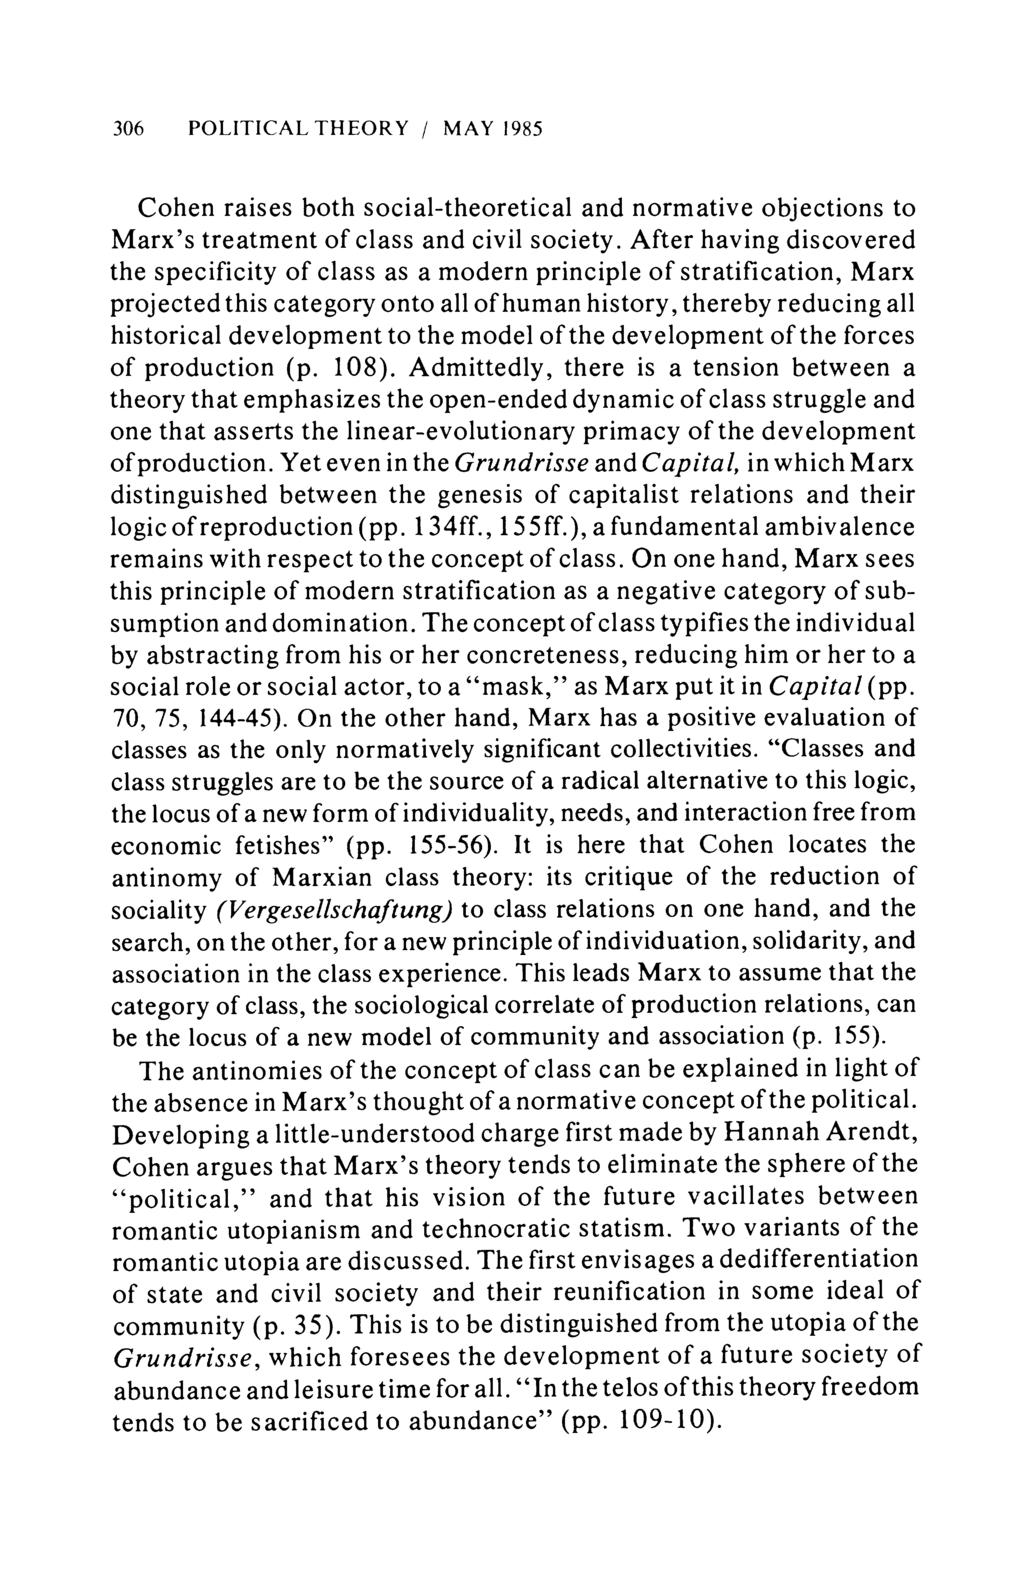 306 POLITICAL THEORY / MAY 1985 Cohen raises both social-theoretical and normative objections to Marx's treatment of class and civil society.